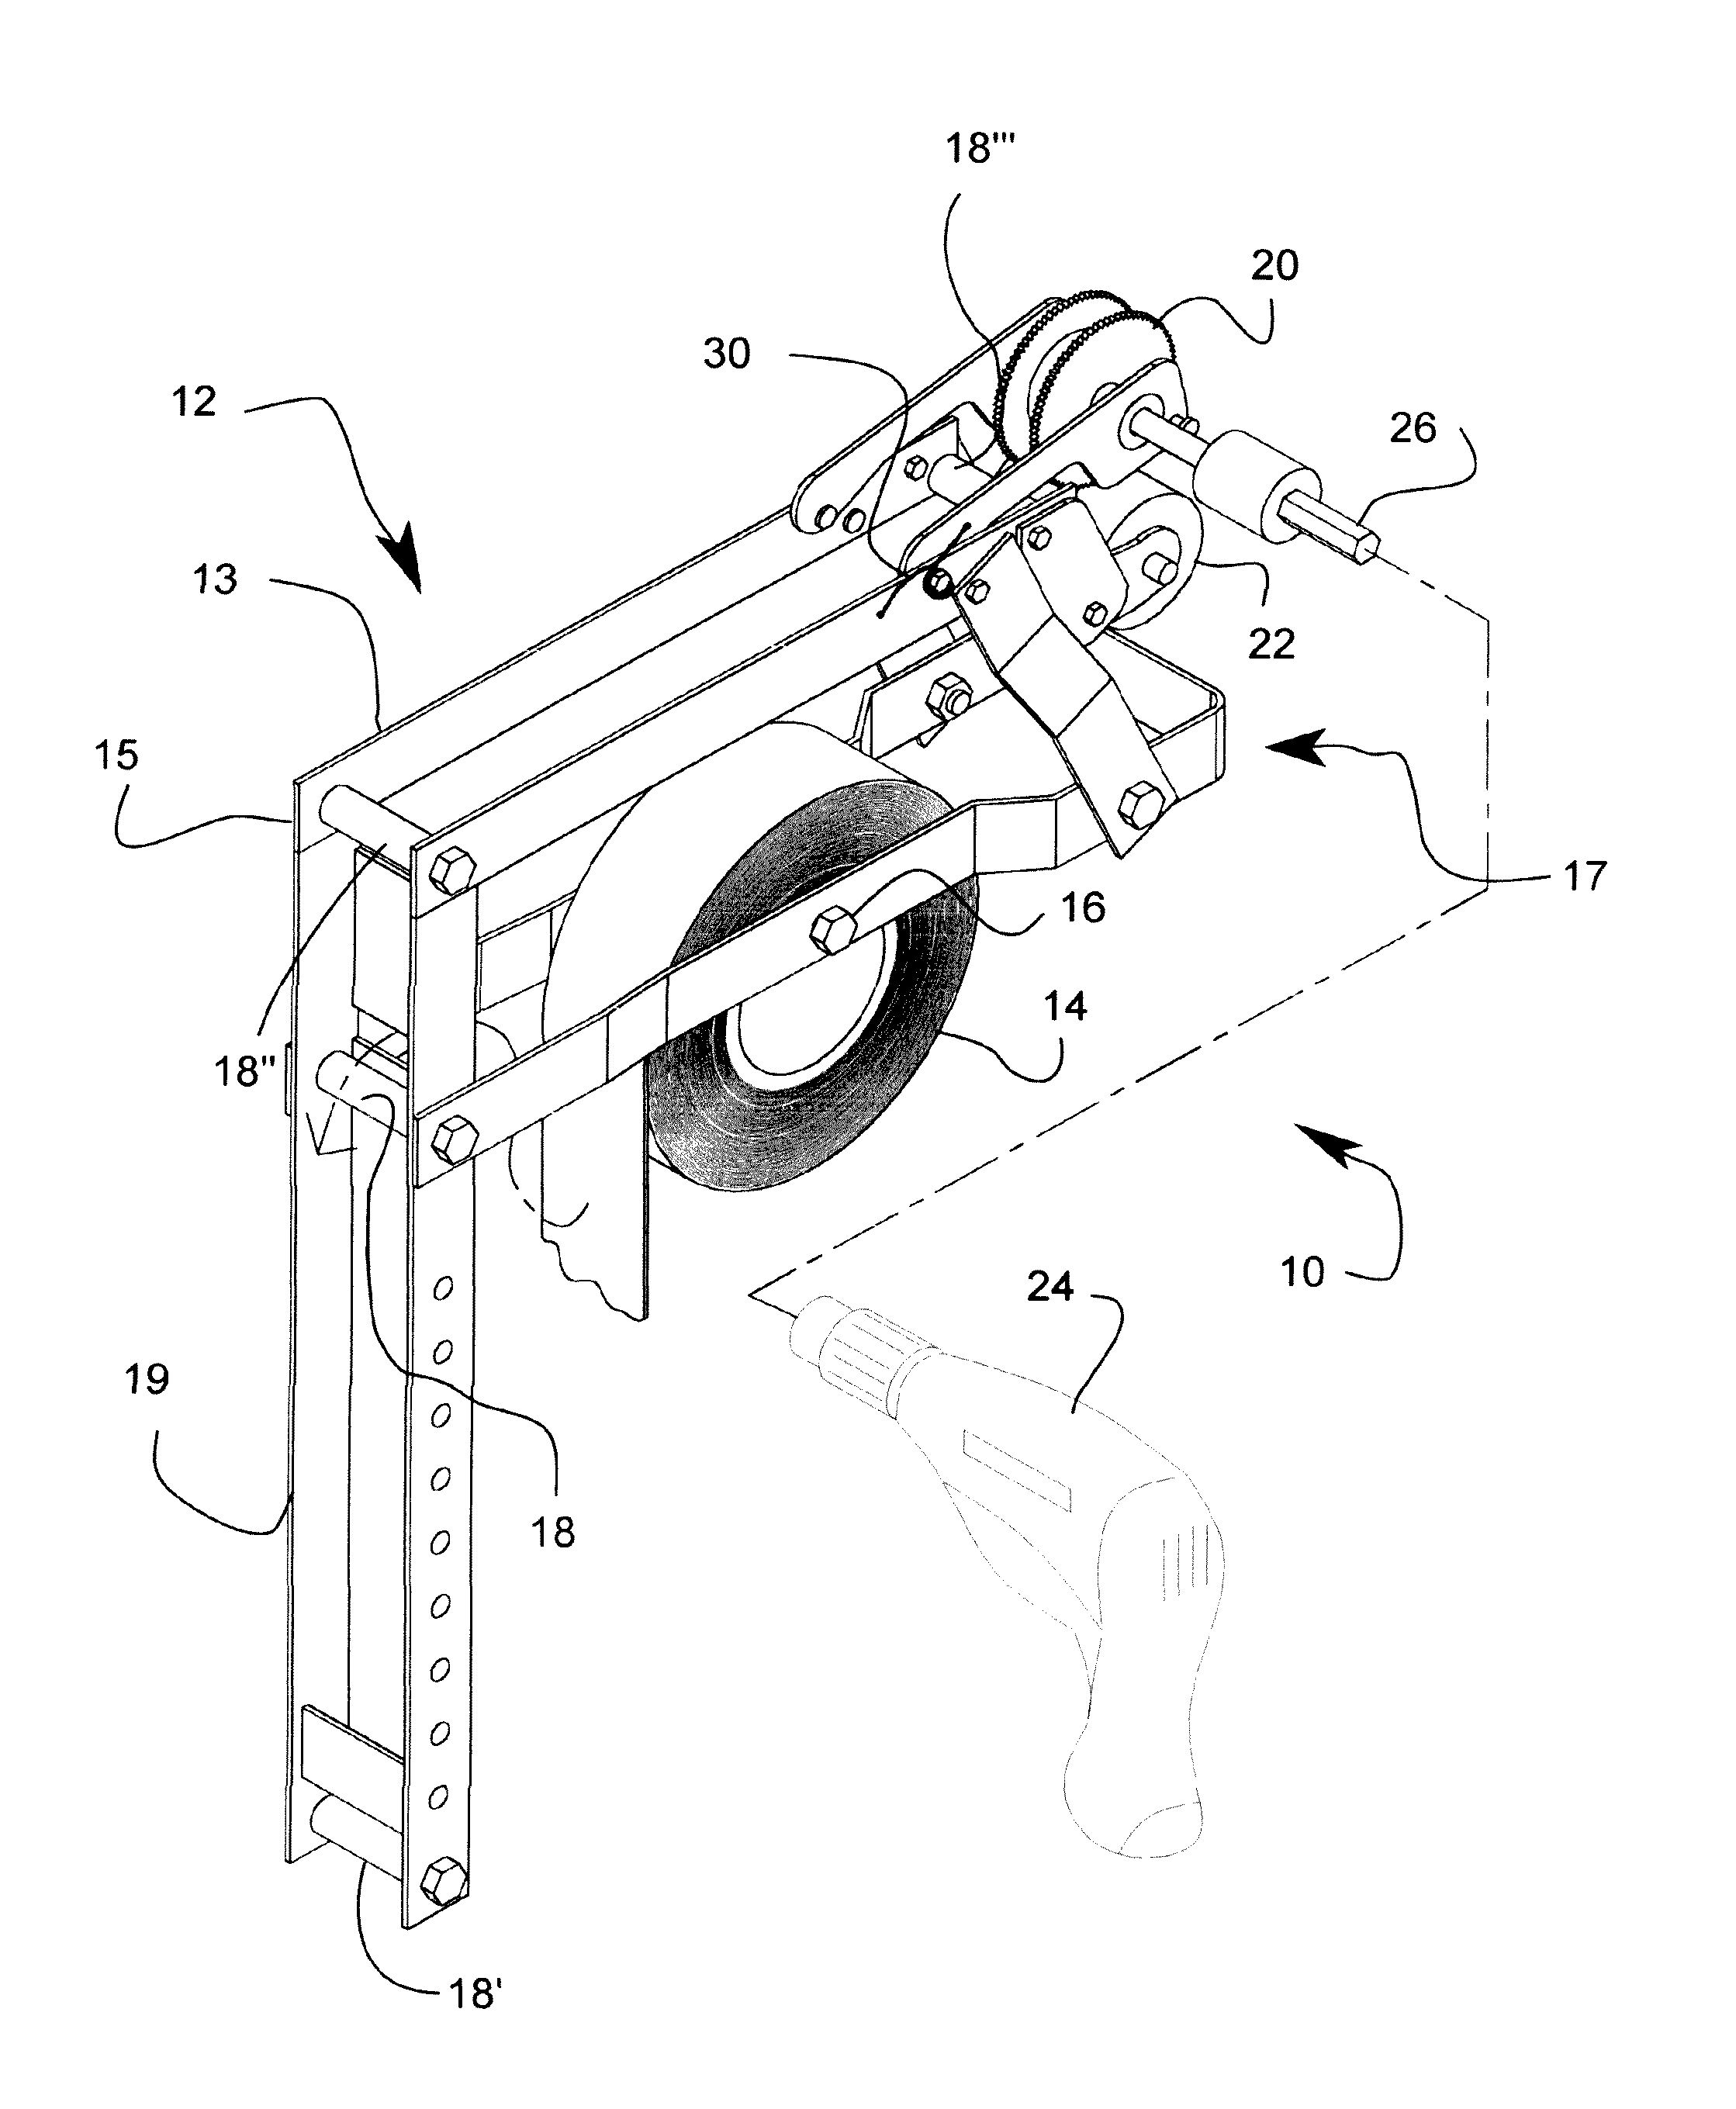 Drywall tape dispenser actuated using a drill